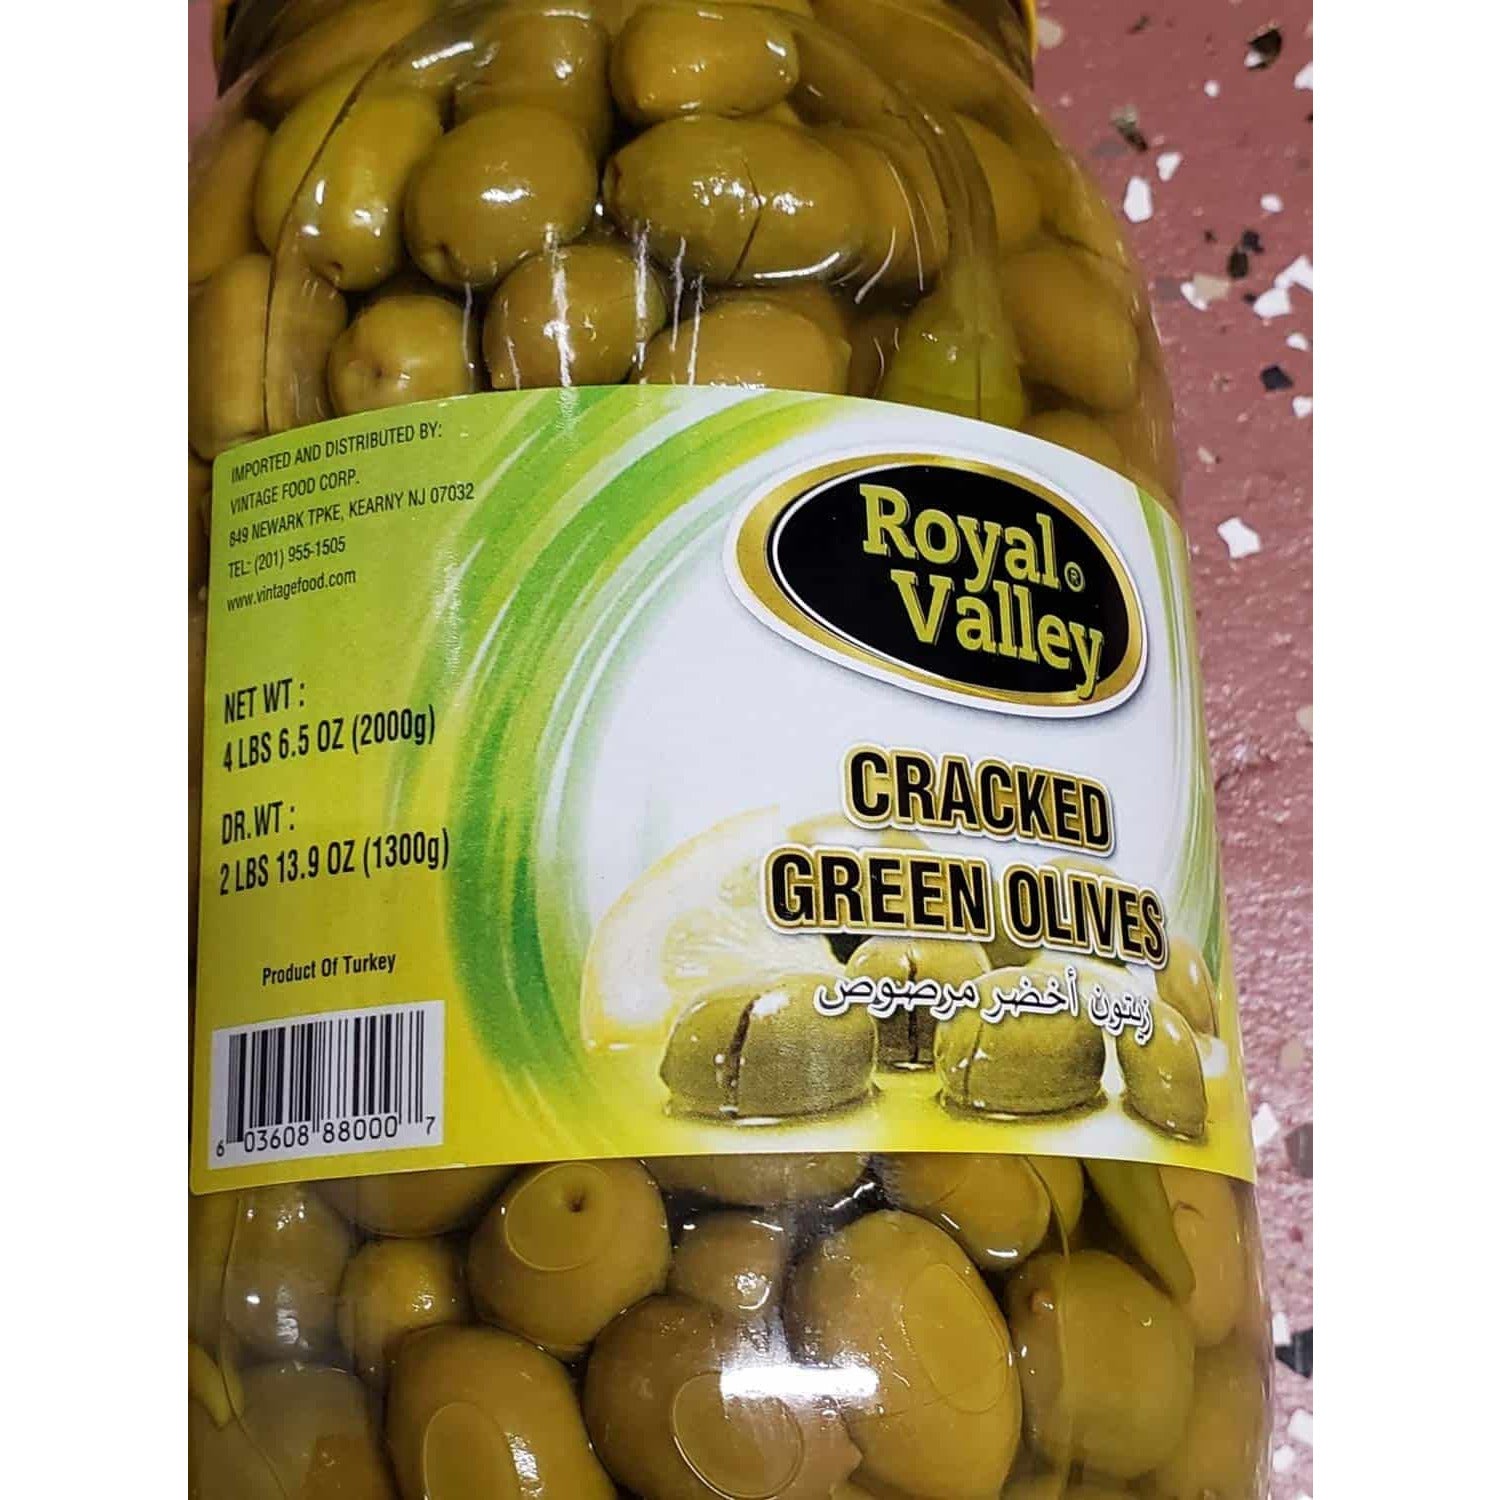 Royal Valley Turkish Style Cracked Green Olives, 4.4lb